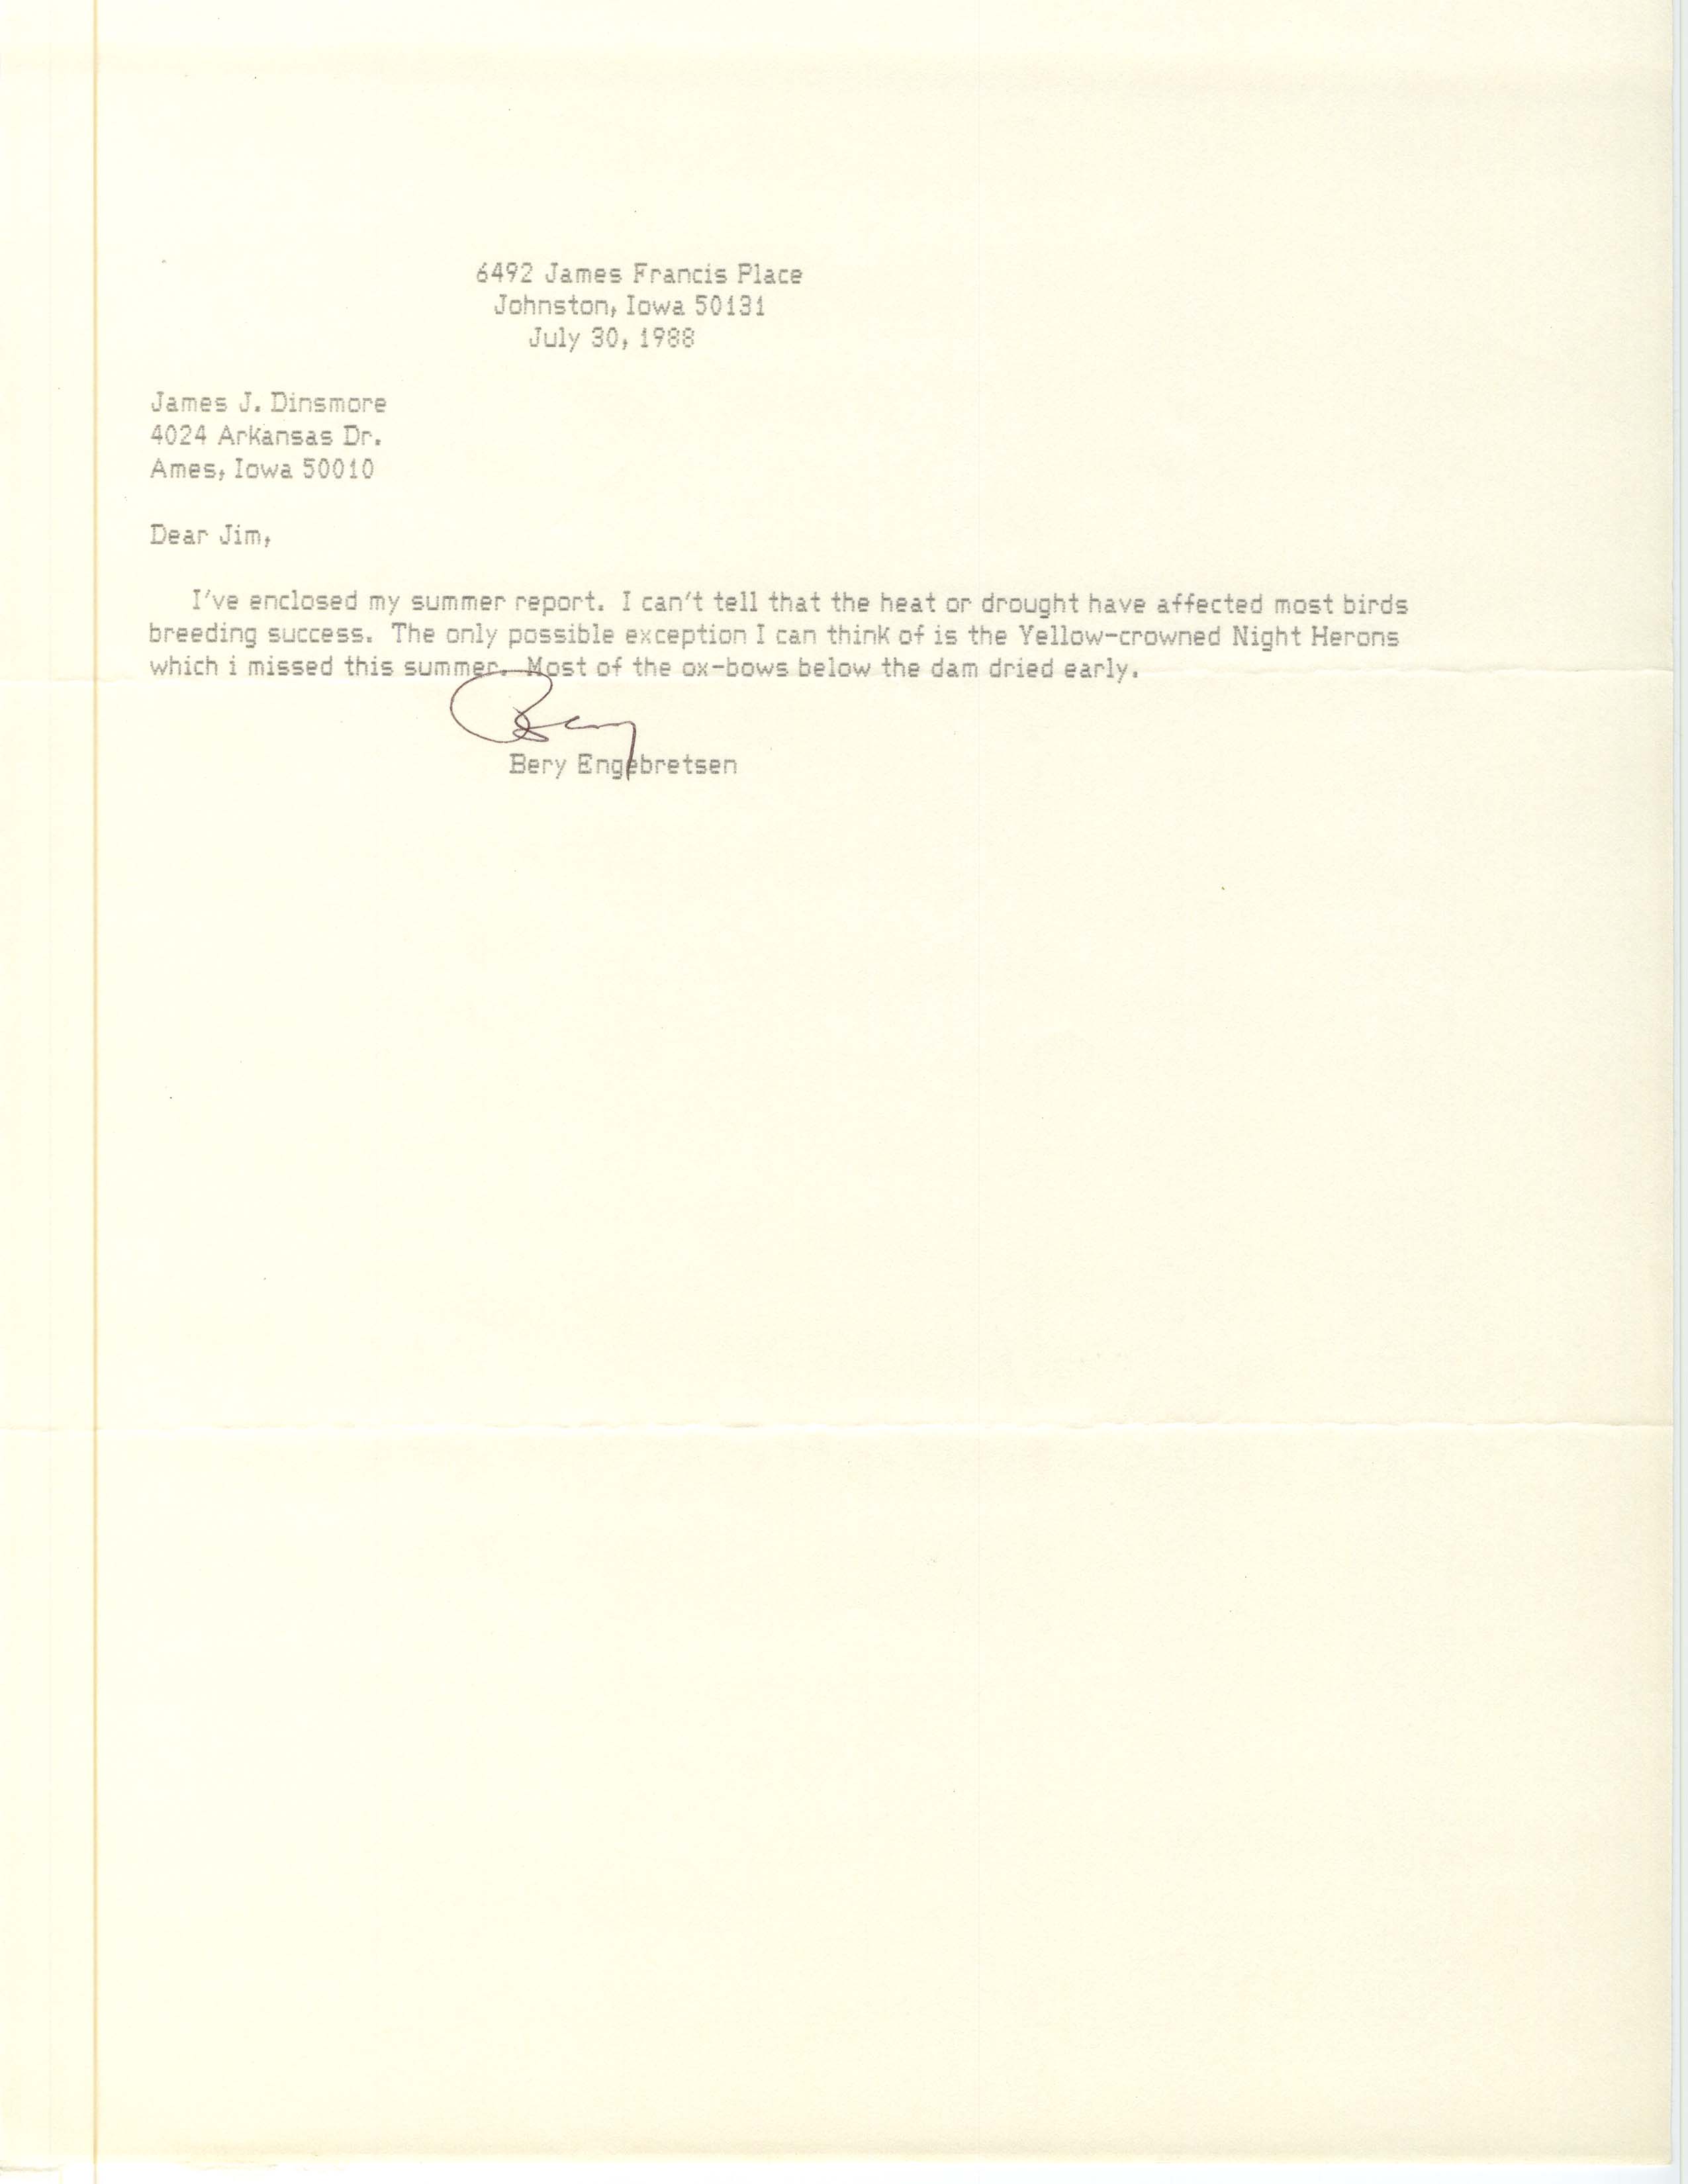 Field notes and Bery Engebretsen letter to James J. Dinsmore, July 30, 1988